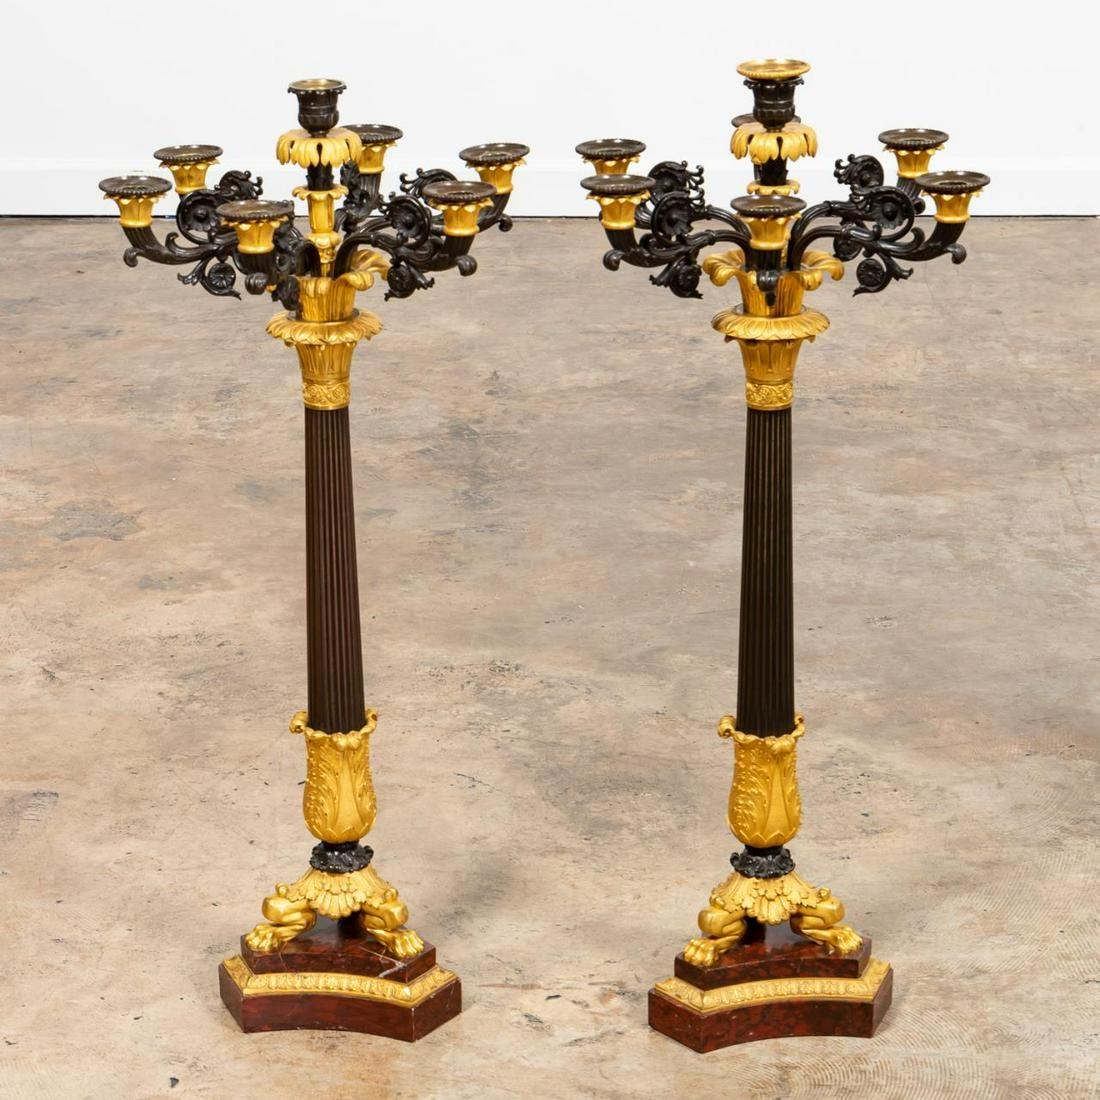 Pair of Gilt Bronze Candlesticks on Marble For Sale 7